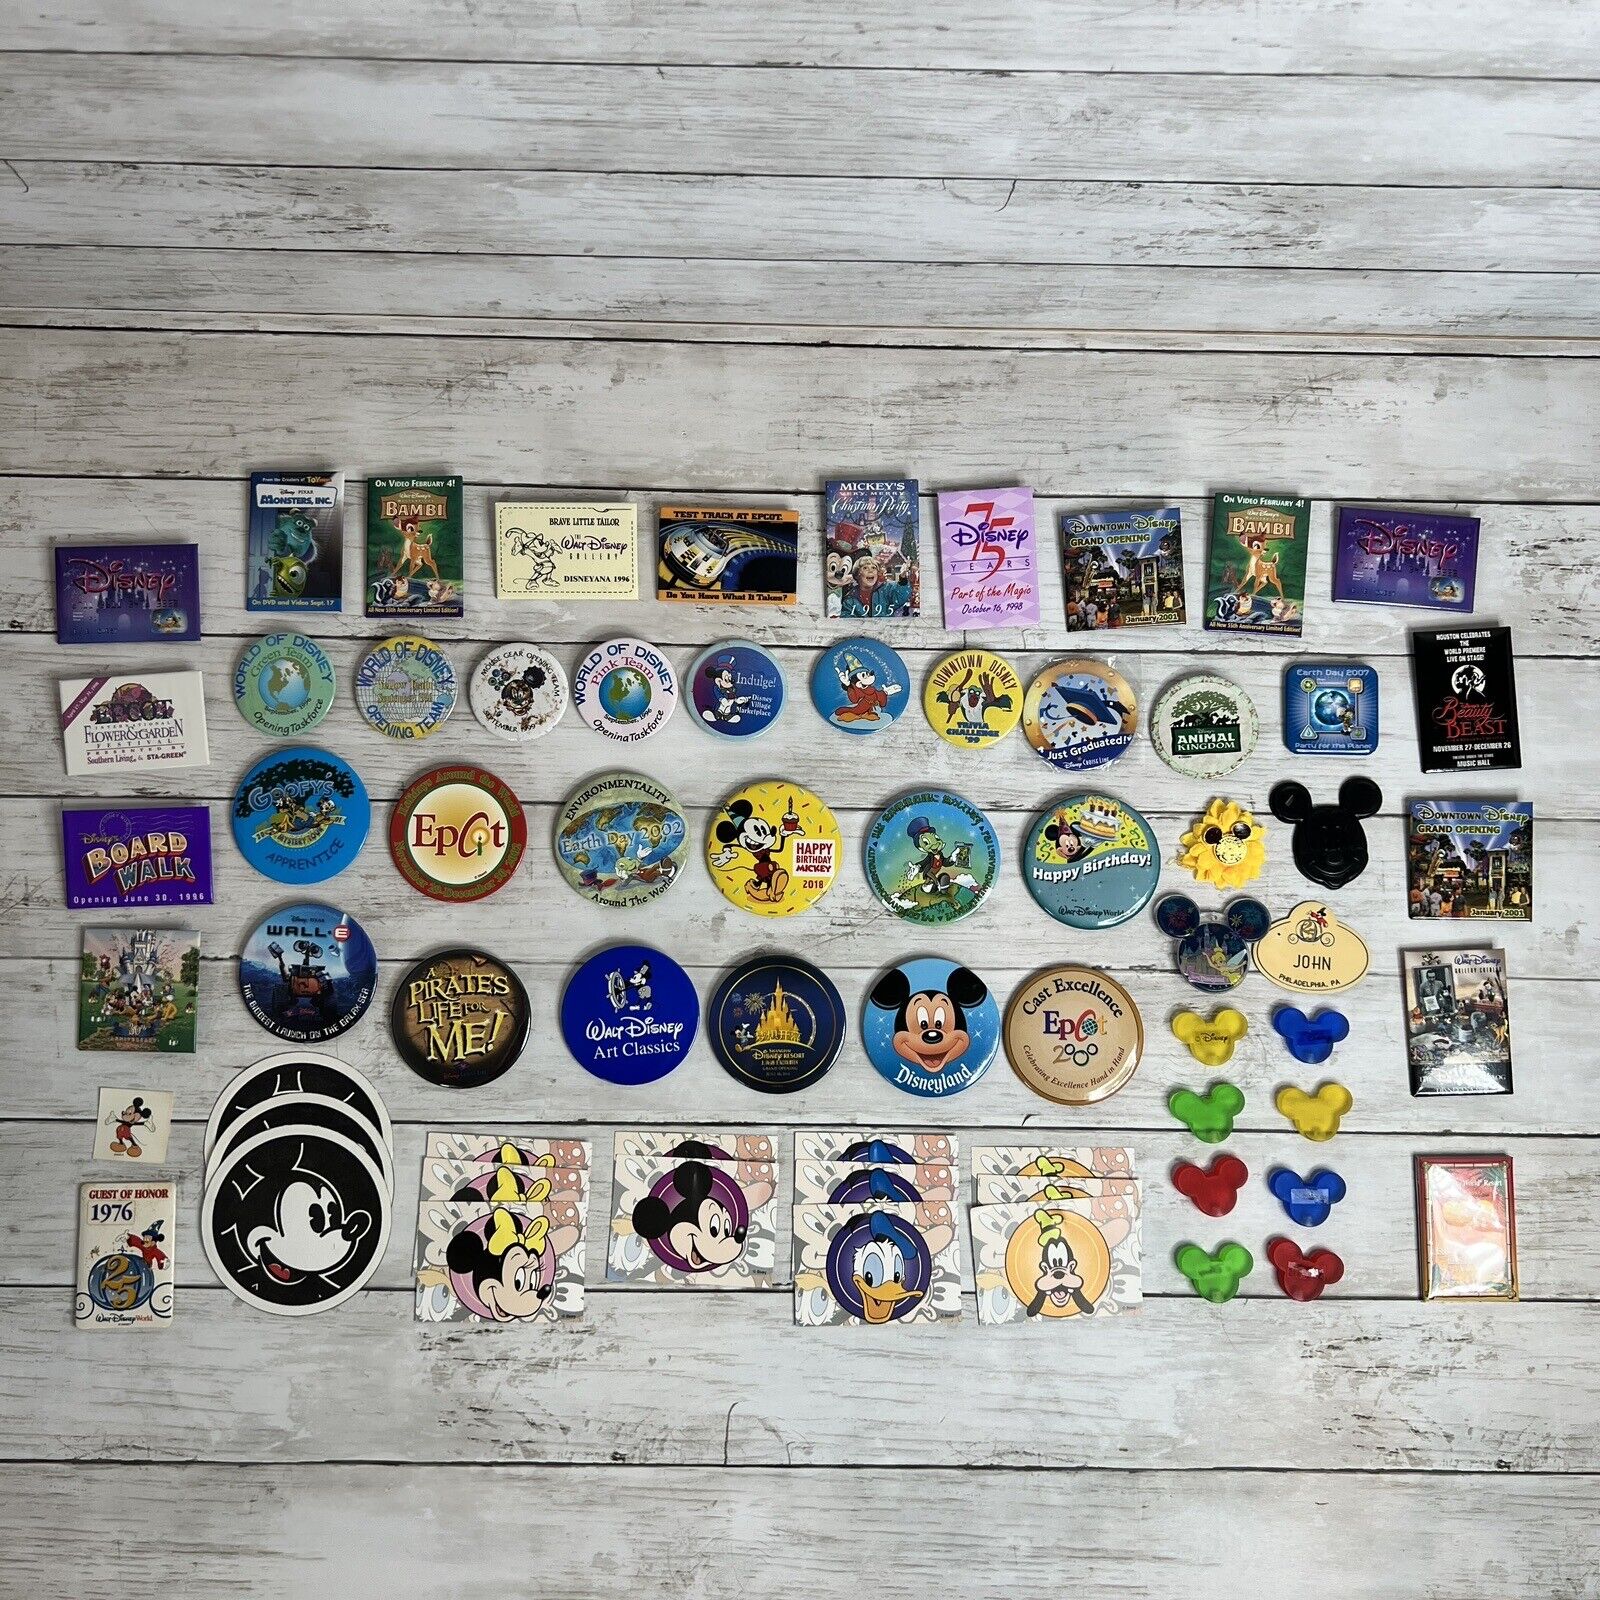 Huge Lot DISNEY Buttons Pins Cards Balloon Weights Coasters Film Promo Merch Vtg